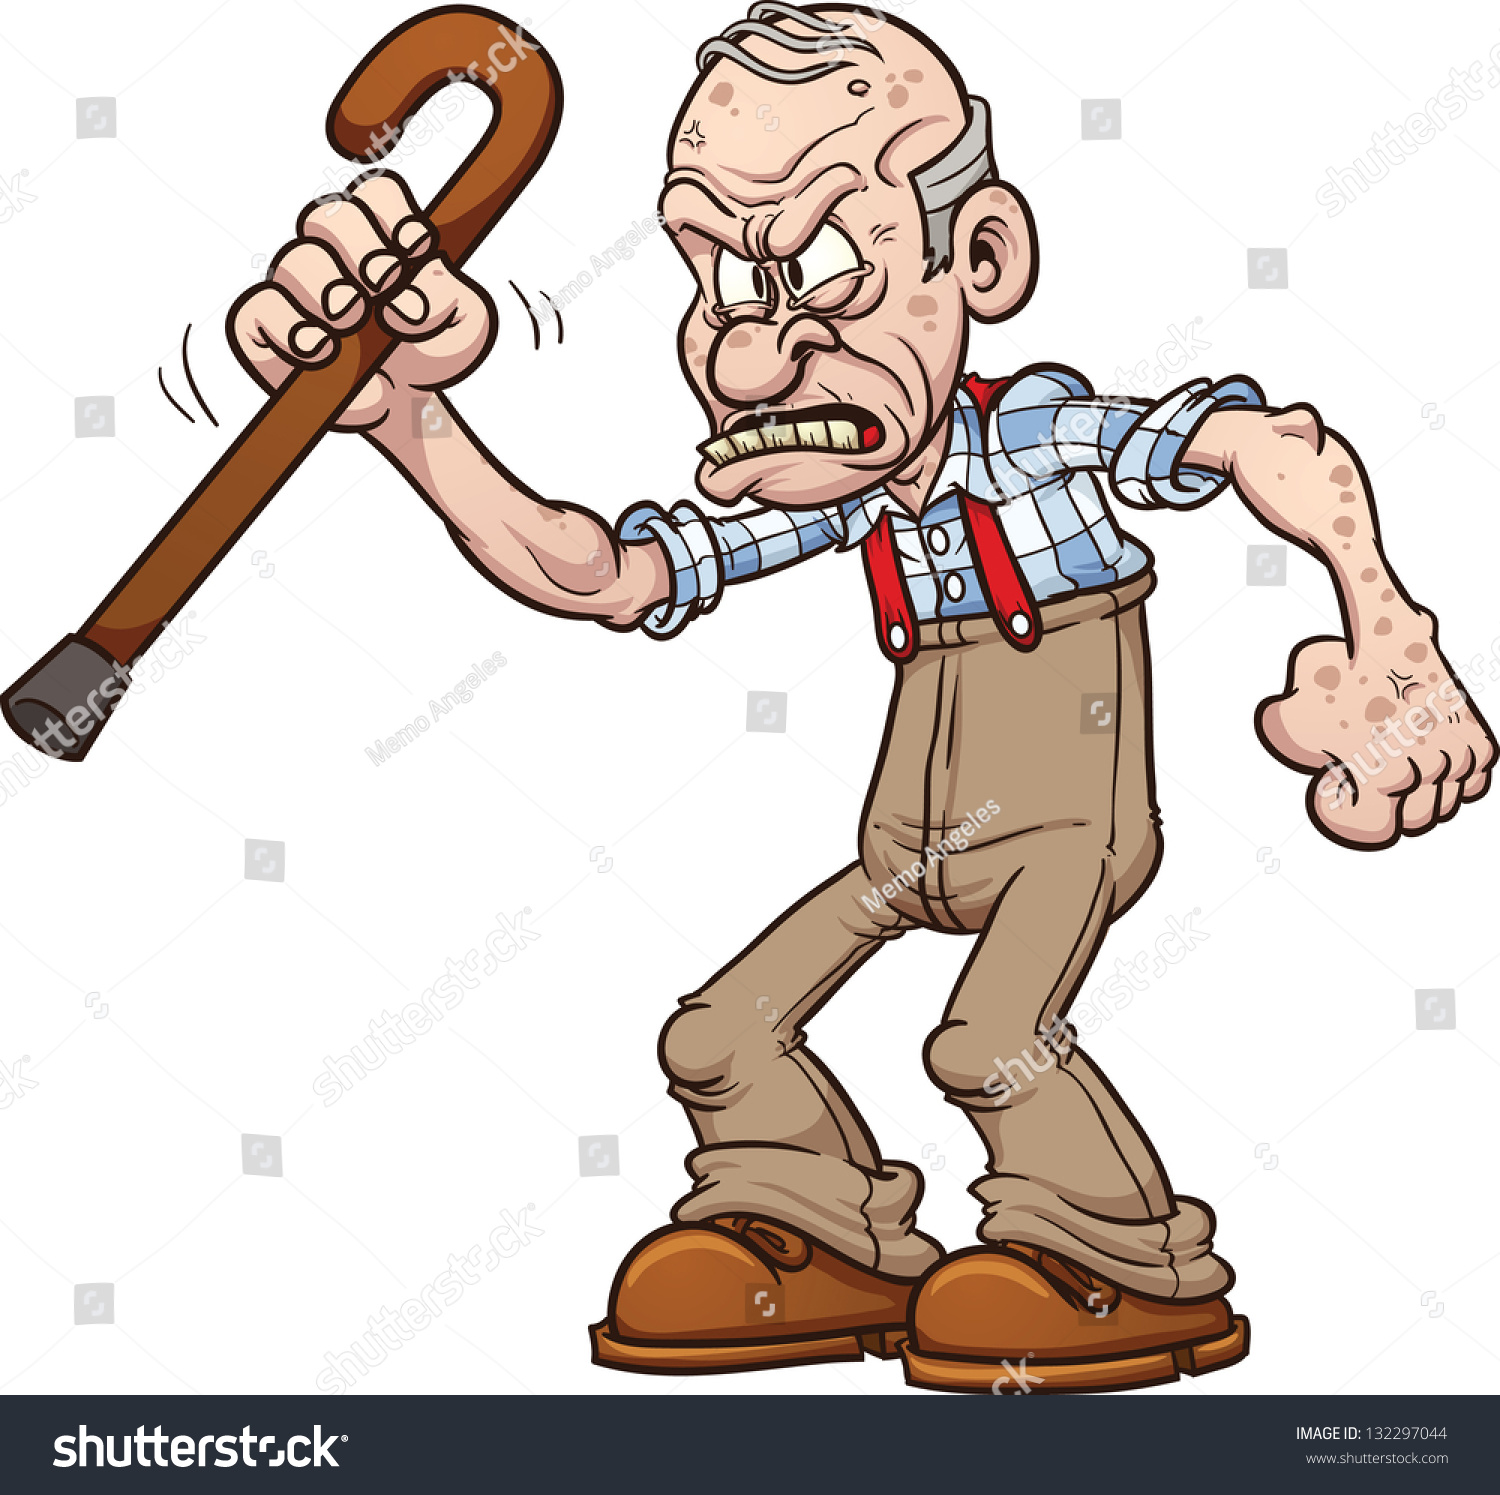 stock-vector-grumpy-old-man-vector-clip-art-illustration-with-simple-gradients-all-in-a-single-layer-132297044.jpg